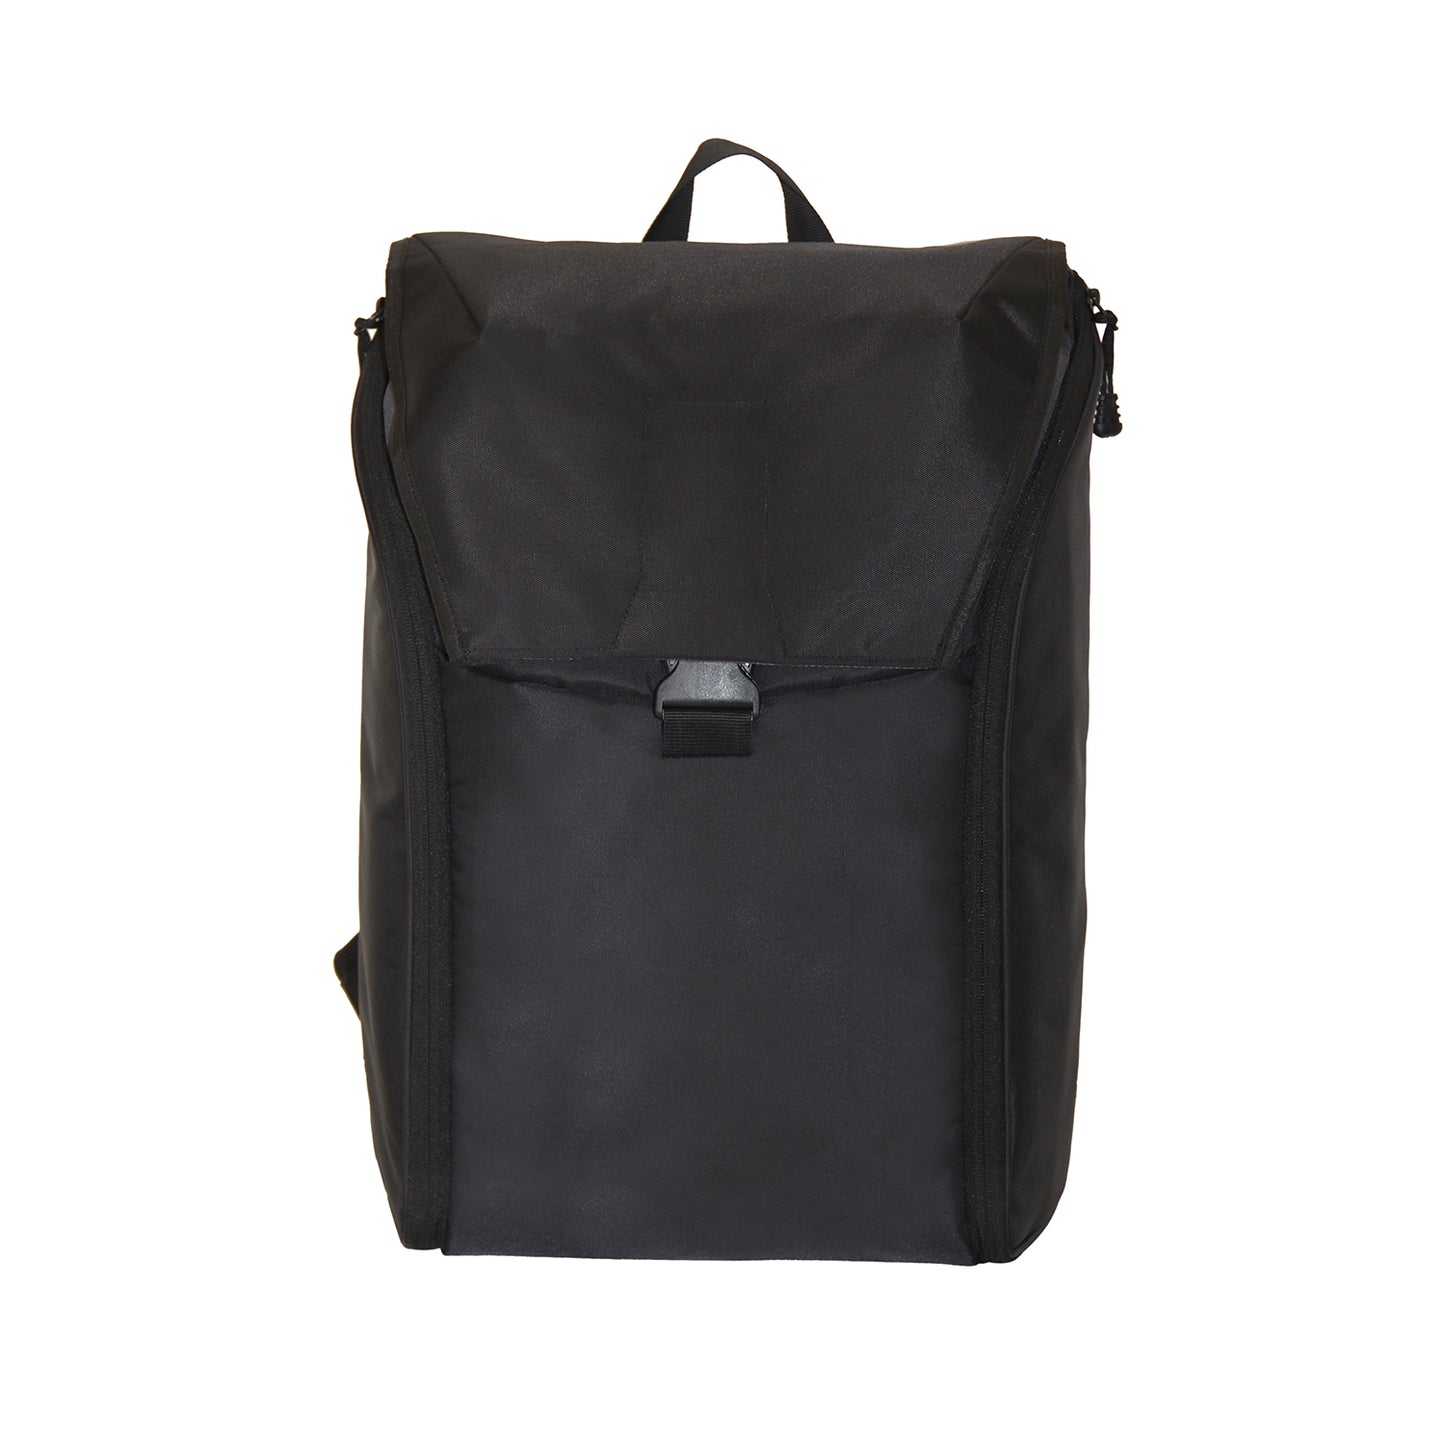 All Black Commuter Day Pack